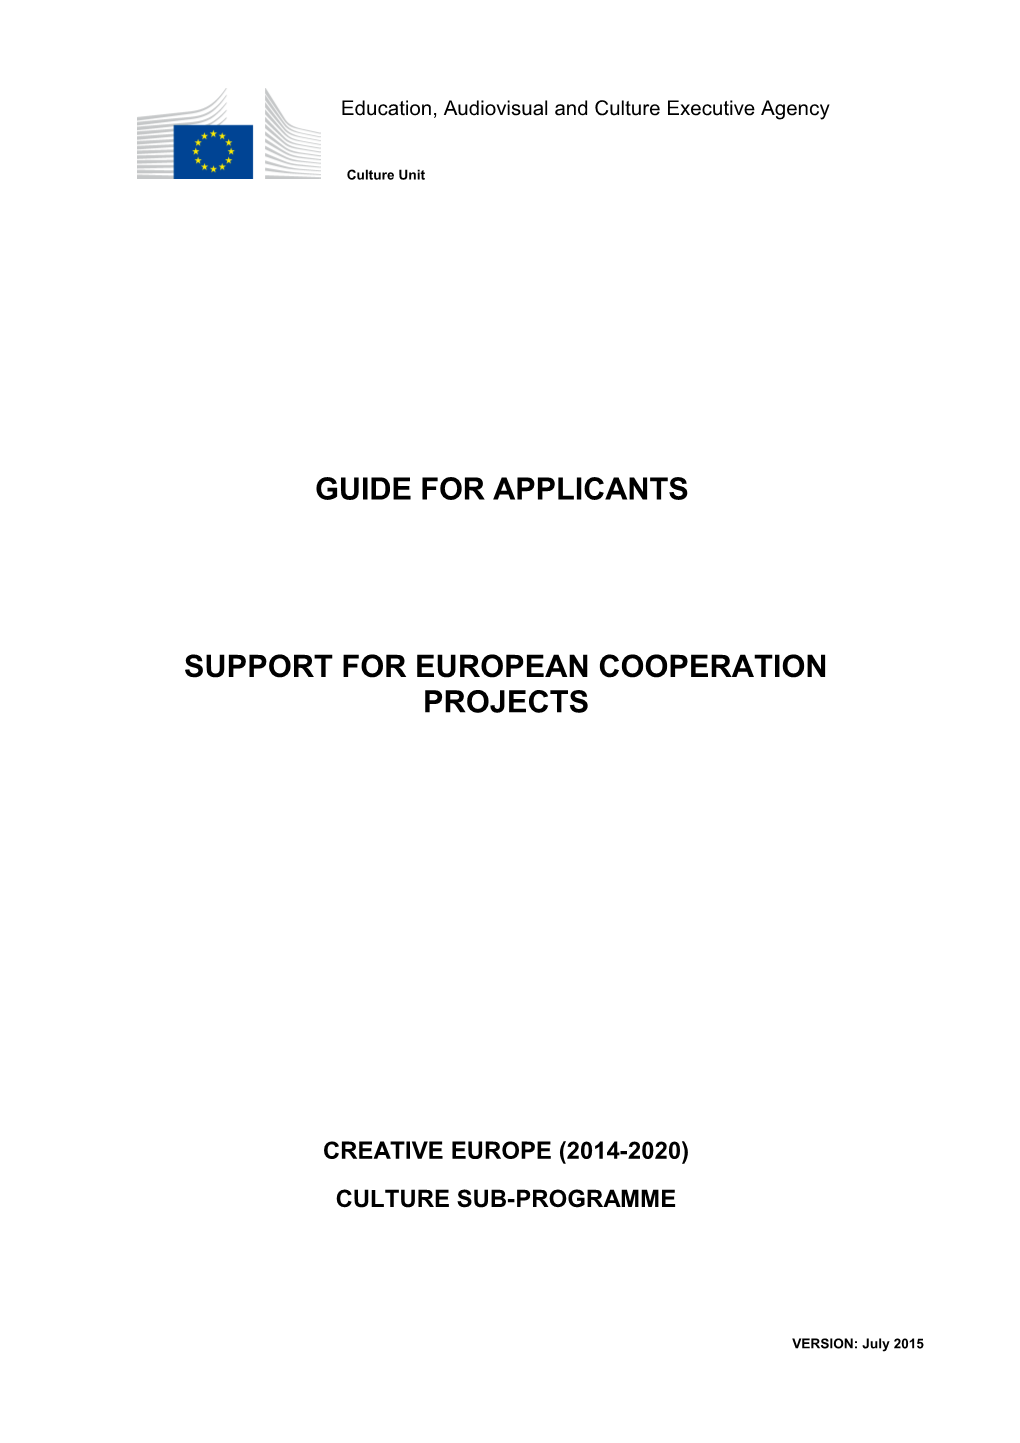 Support for European Cooperation Projects